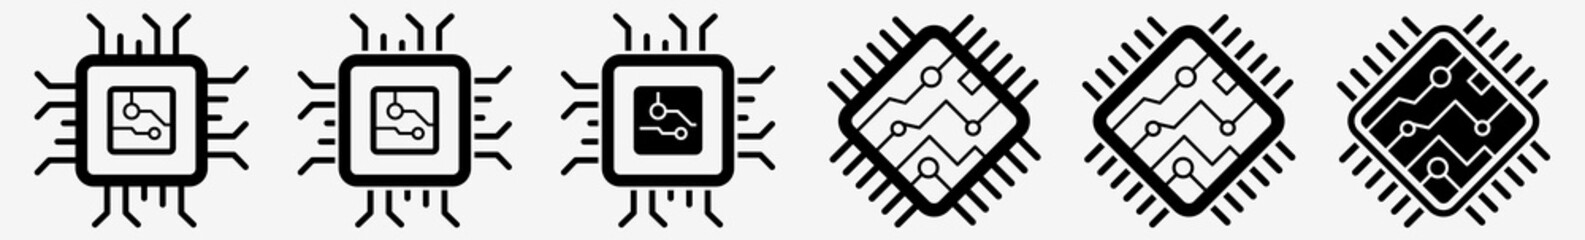 Microchip Icon Computer Microchip Set | Microchips Icon Chipset Vector Illustration Logo | Micro Chip CPU Icon Isolated Mobile Microchip Processor Collection